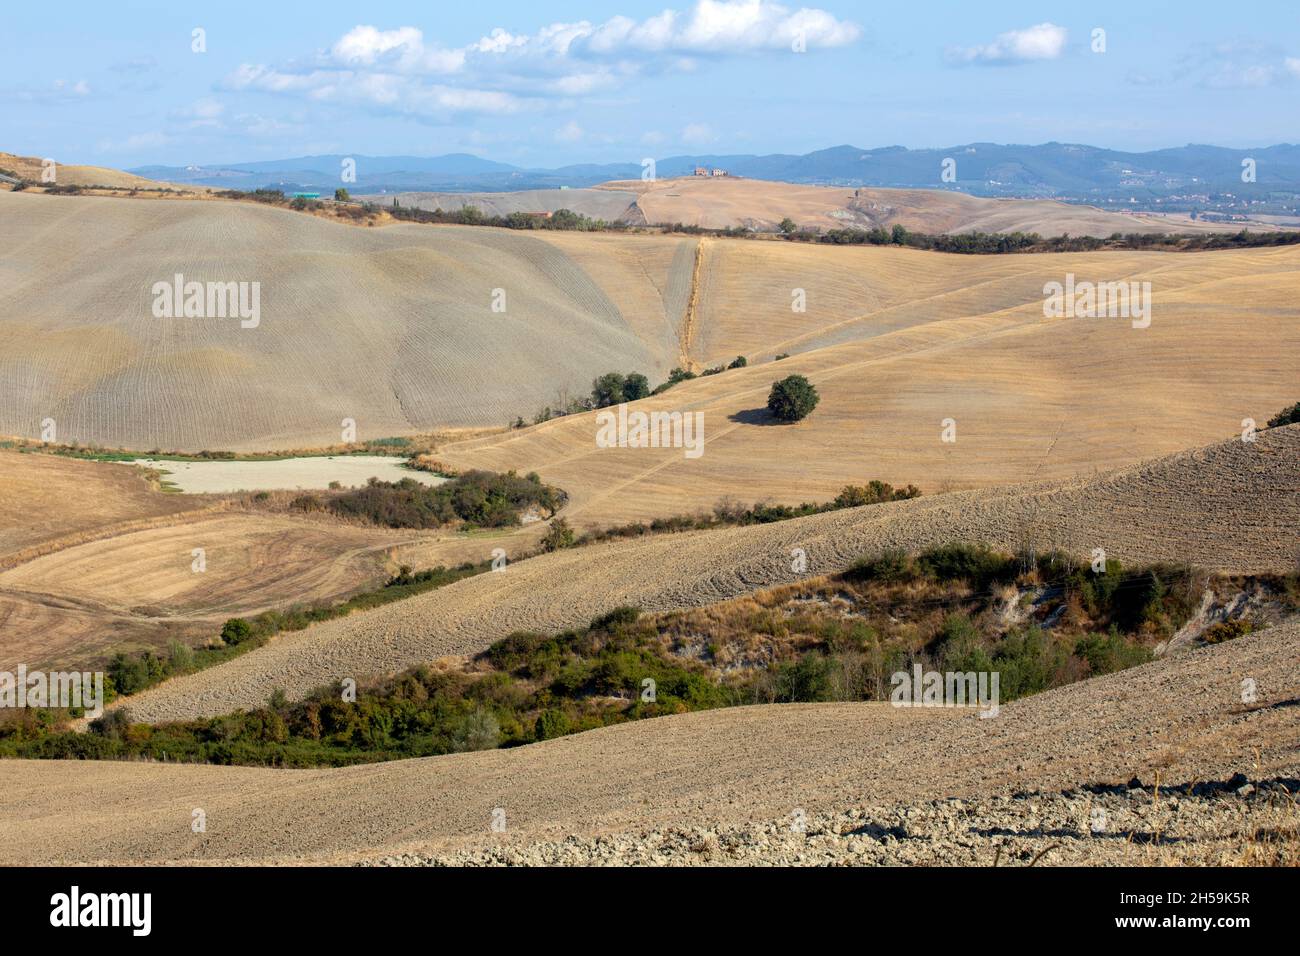 Typical landscape in val d' Orcia, Tuscany, Italy Stock Photo